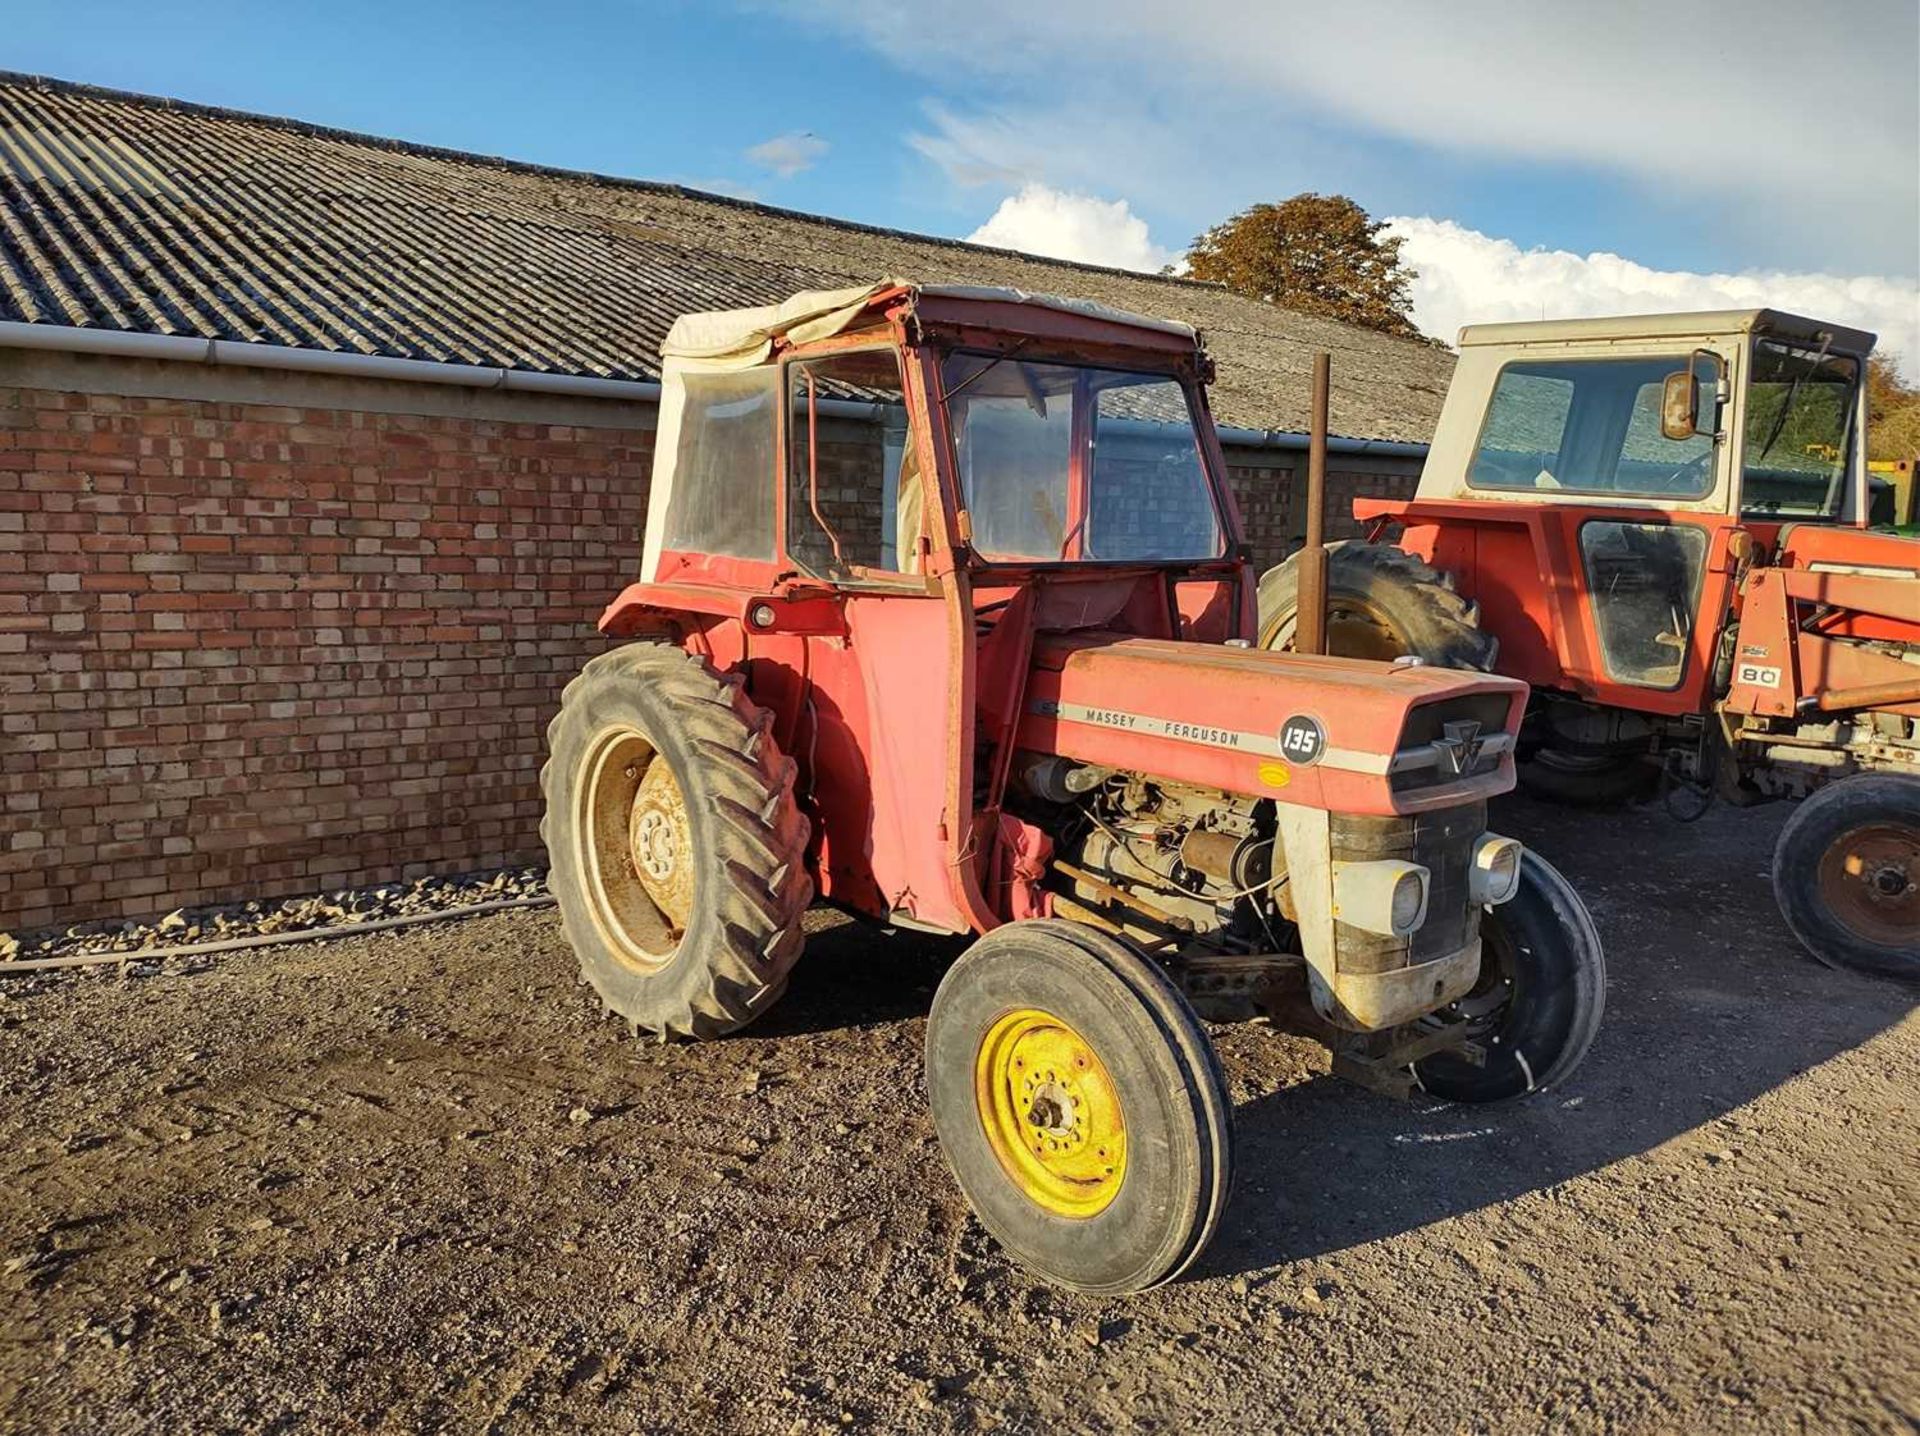 Massey Ferguson 135 Tractor with Original Front Wheels. Pickup Hitch. 2,284 Hrs. Reg: 7JE 705X - Image 10 of 10